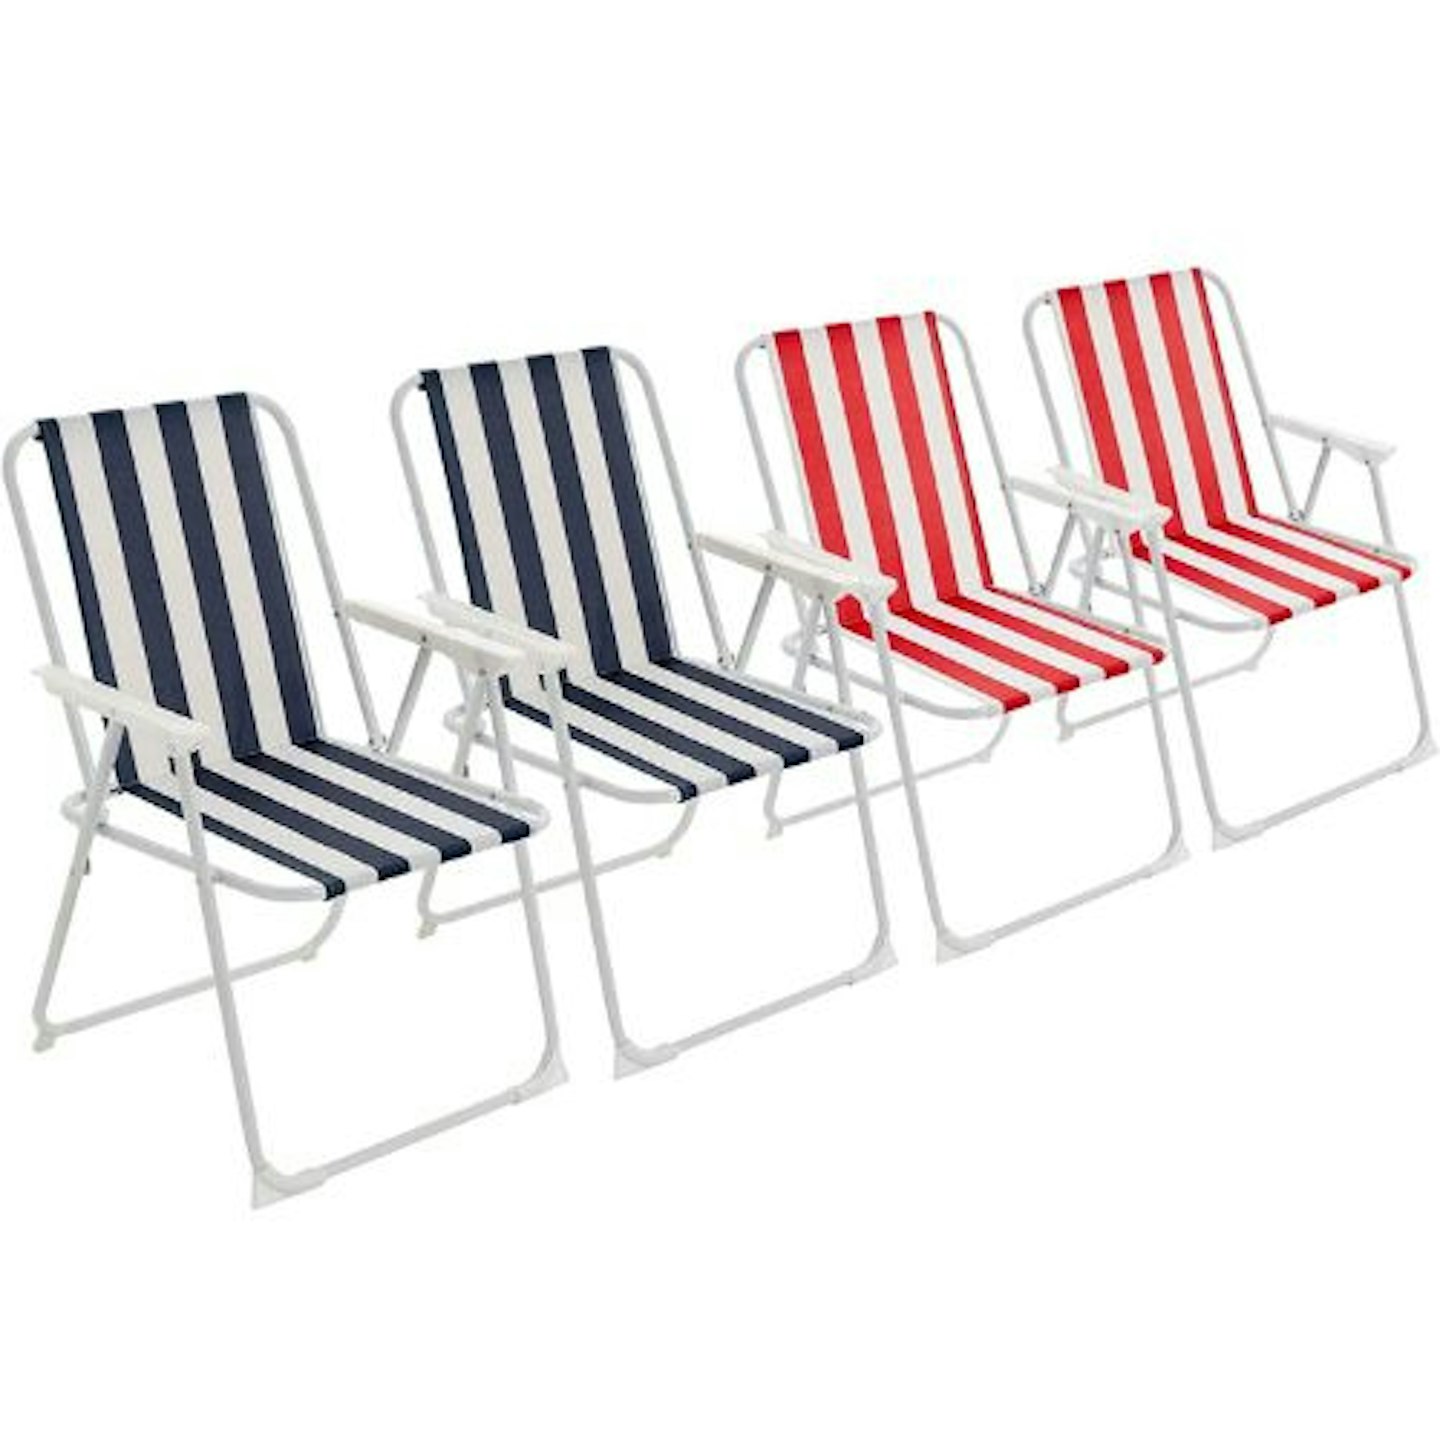 Harbour Housewares Blue and Red Stripe Deckchairs, Set of 4